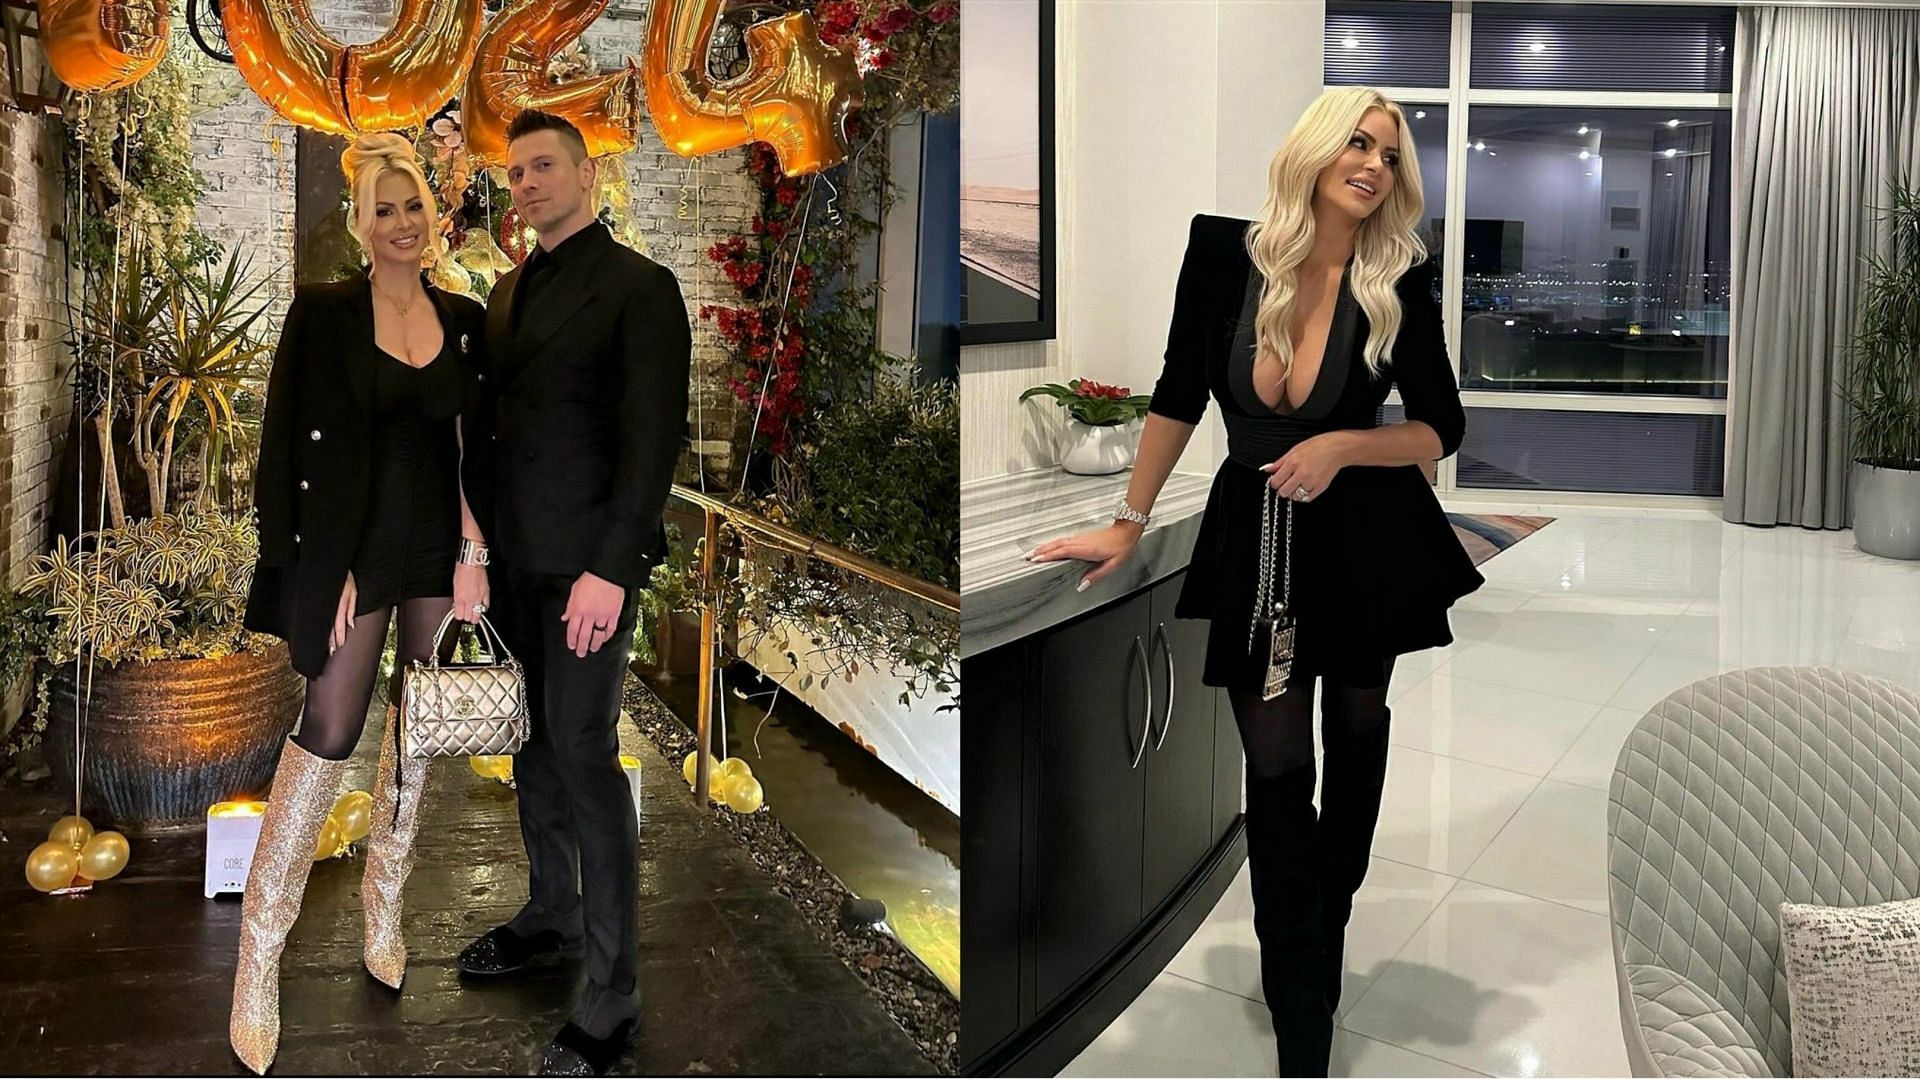 Maryse and The Miz are one of the top power couples in WWE